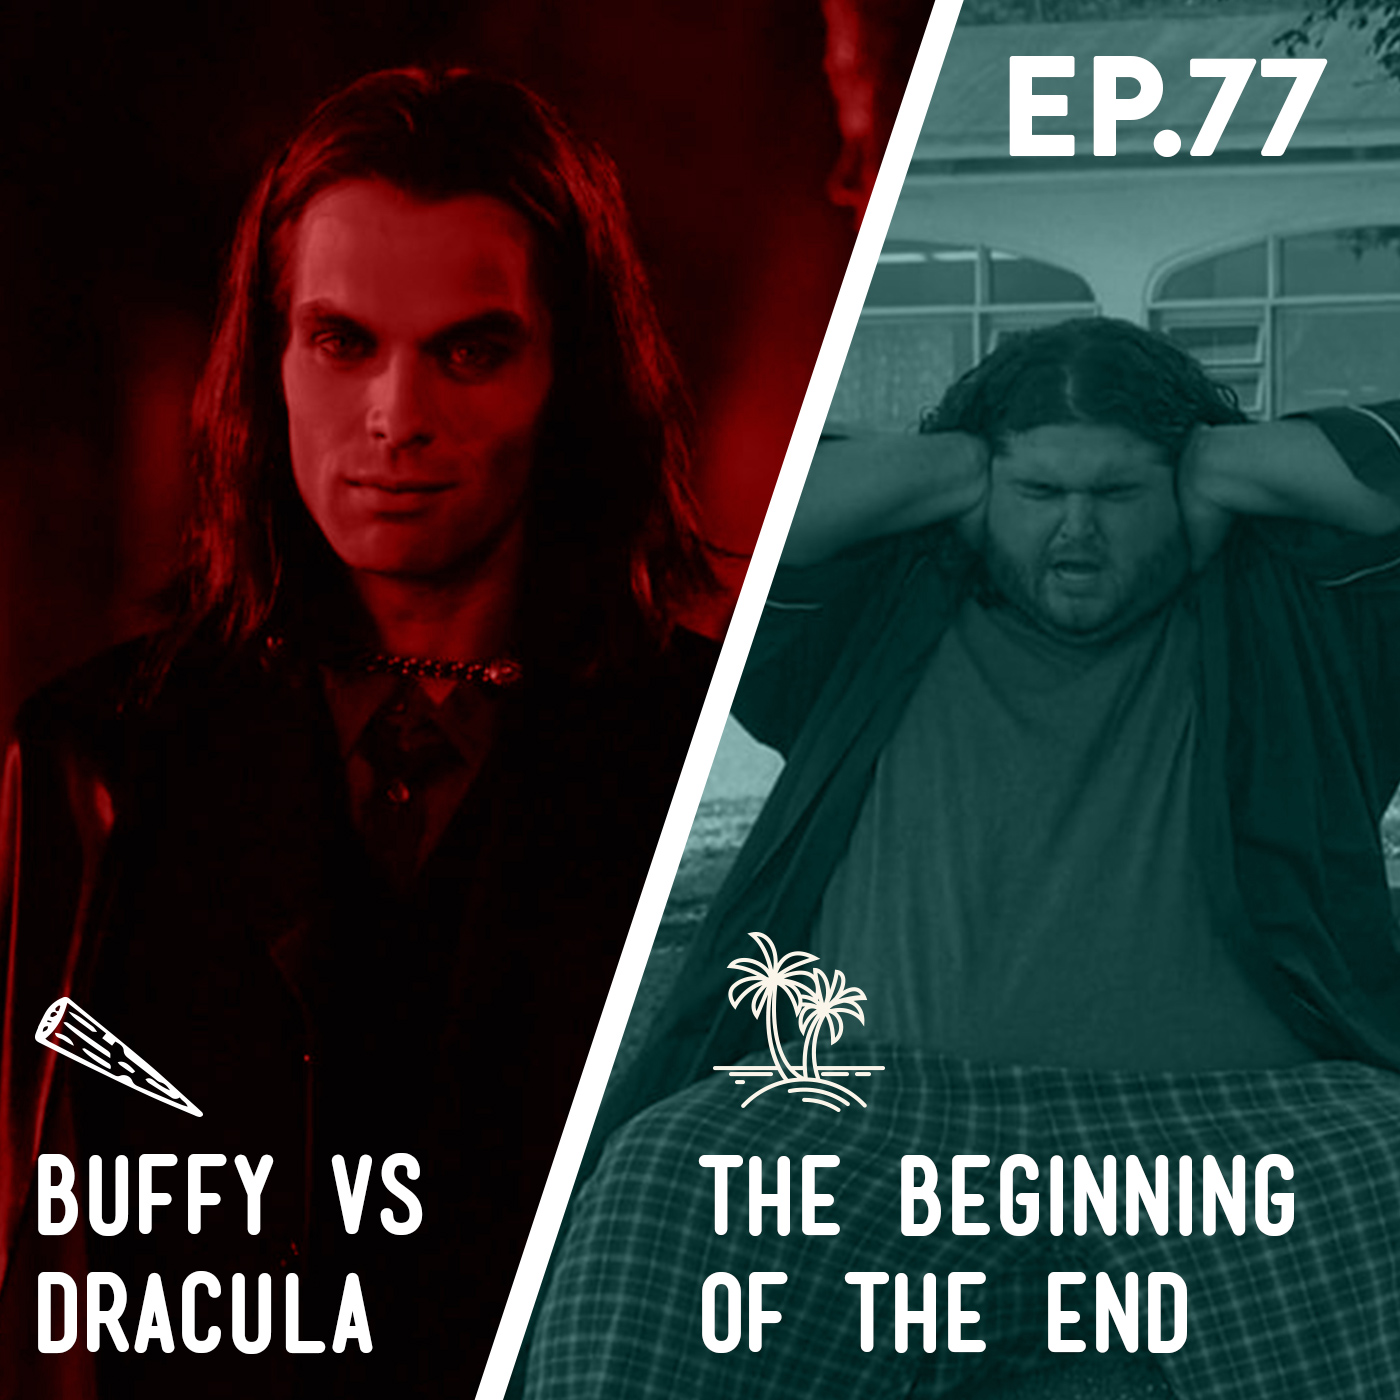 77 - Buffy Vs Dracula / The Beginning of the End Image